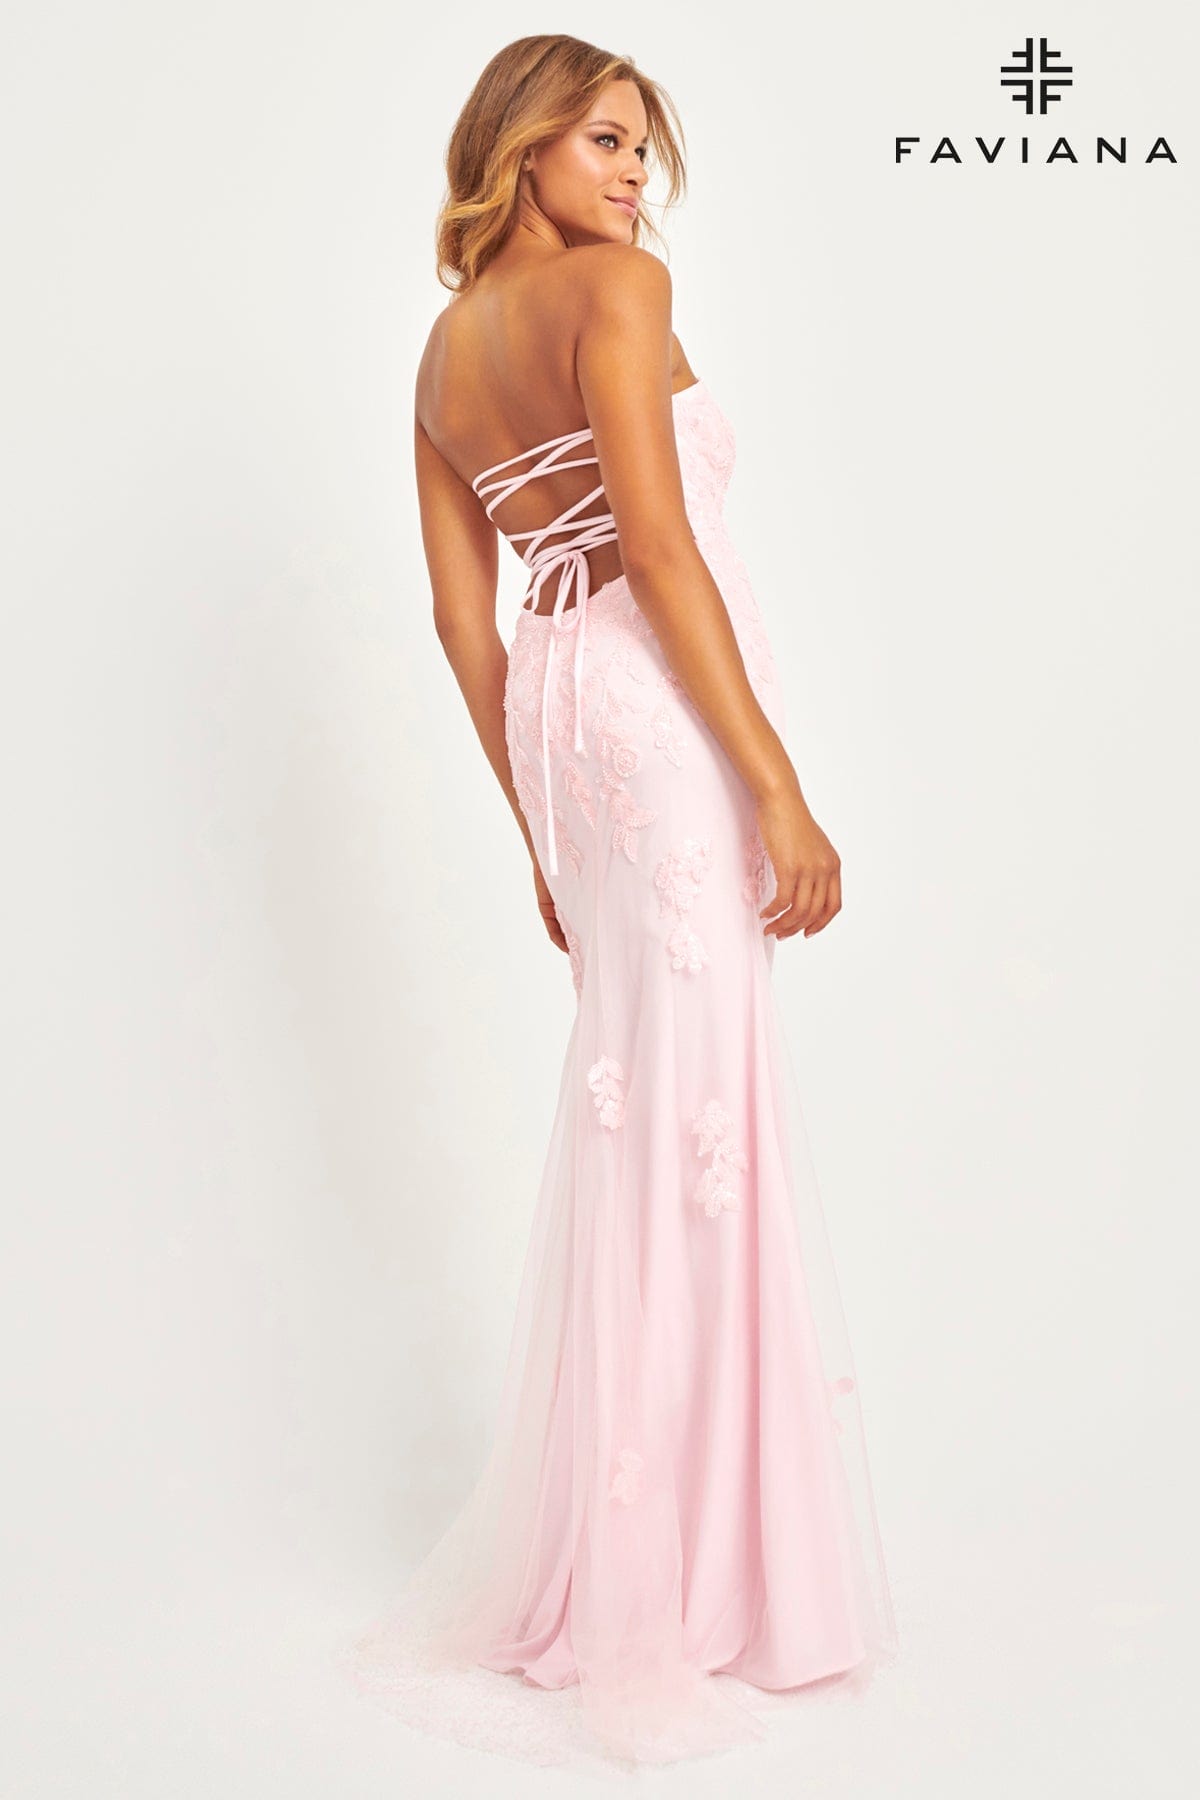 Strapless Light Pink Tulle And Lace Appliqué Dress For Prom | 11004